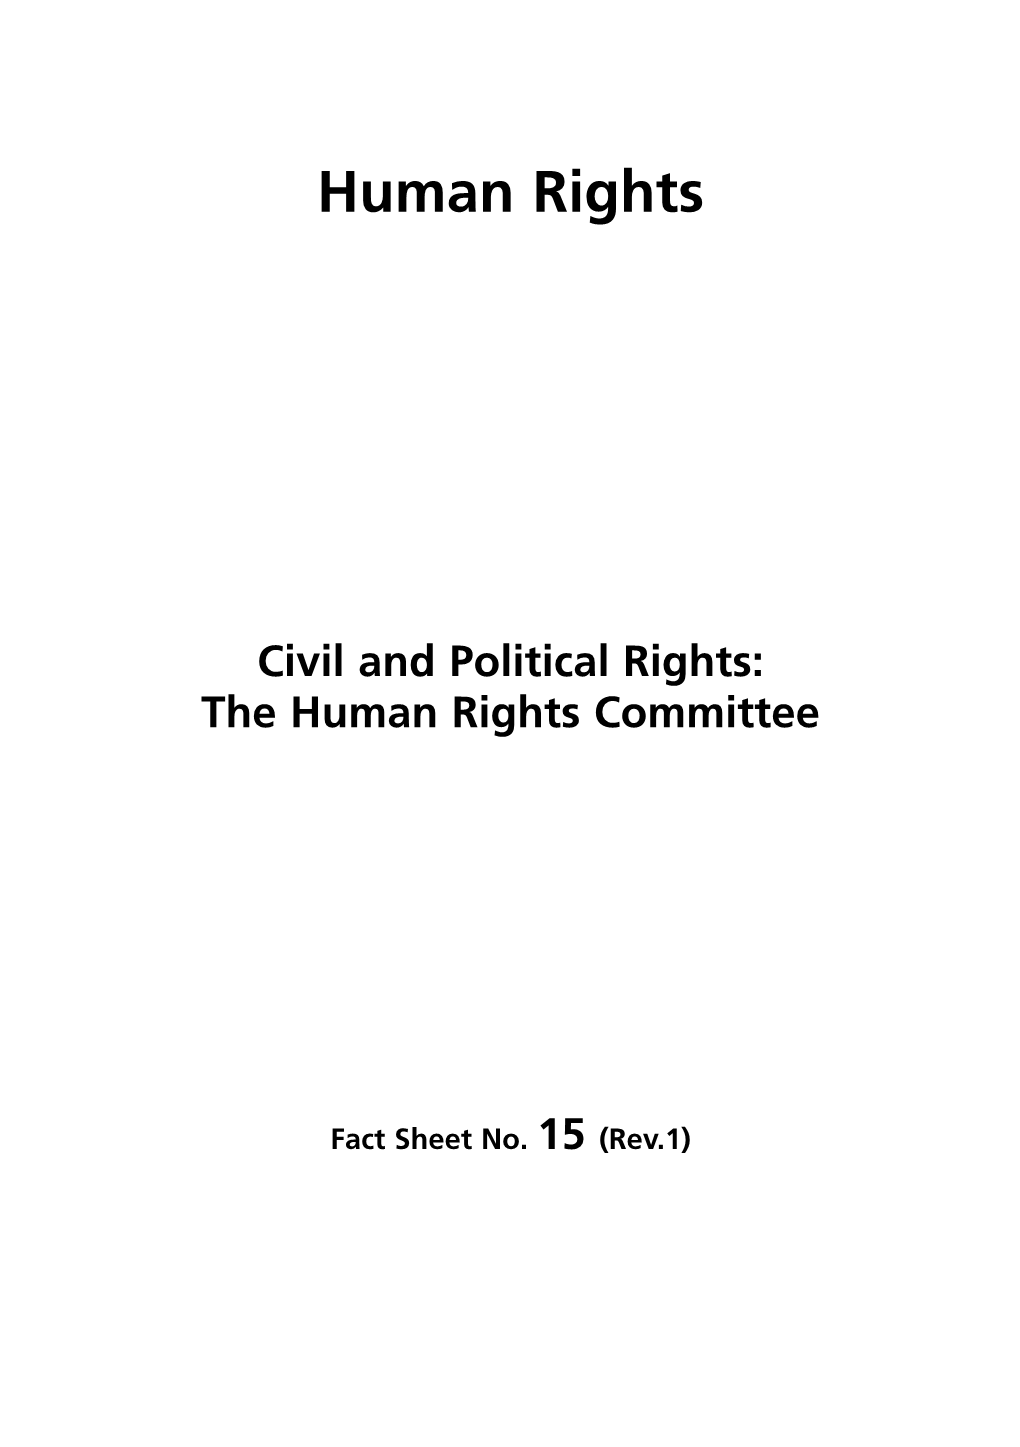 Civil and Political Rights: the Human Rights Committee (Rev.1) No